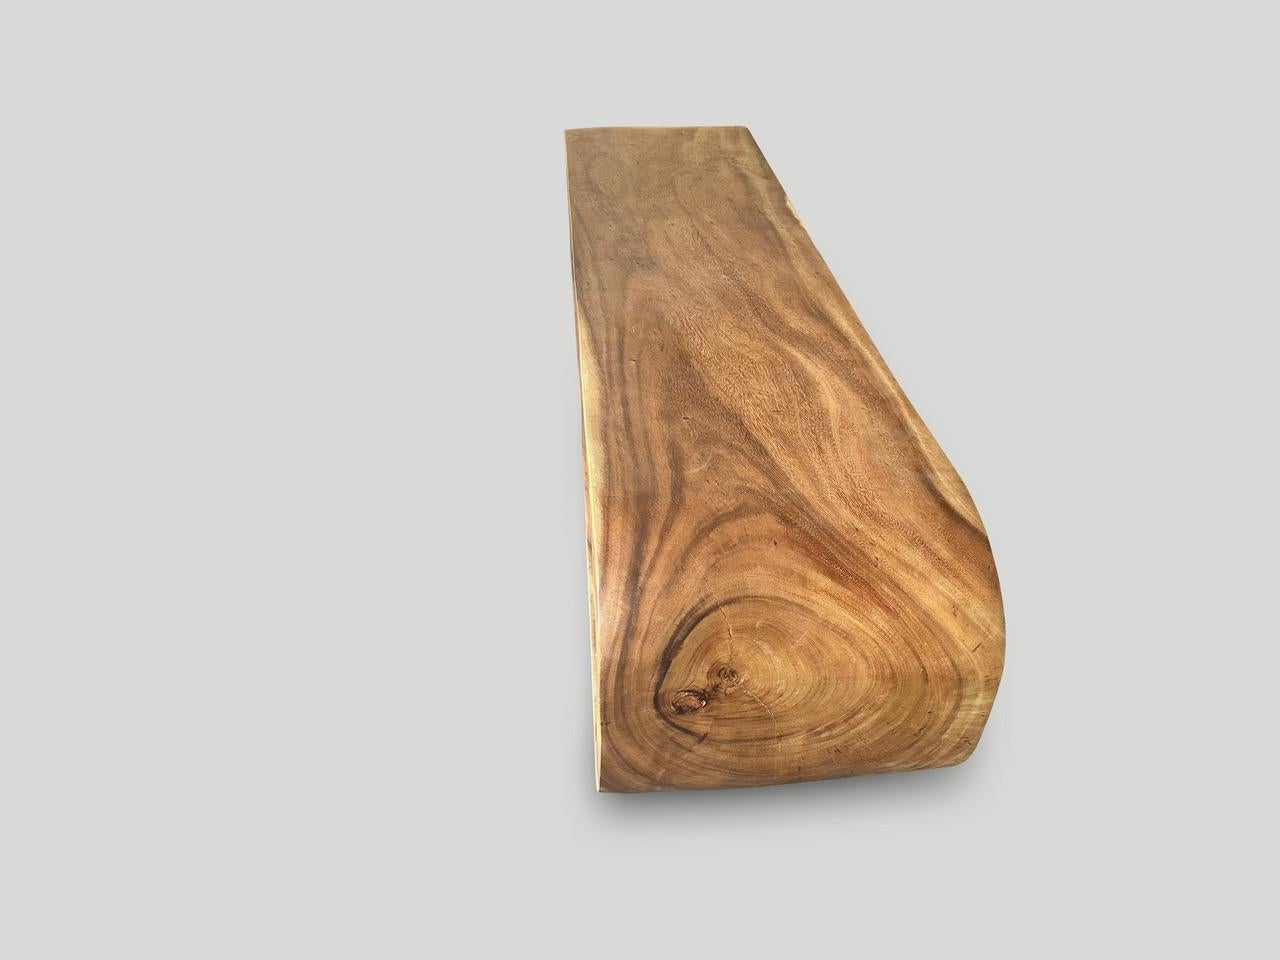 Andrianna Shamaris Minimalist Sculptural Suar Wood Bench or Coffee Table In Excellent Condition For Sale In New York, NY